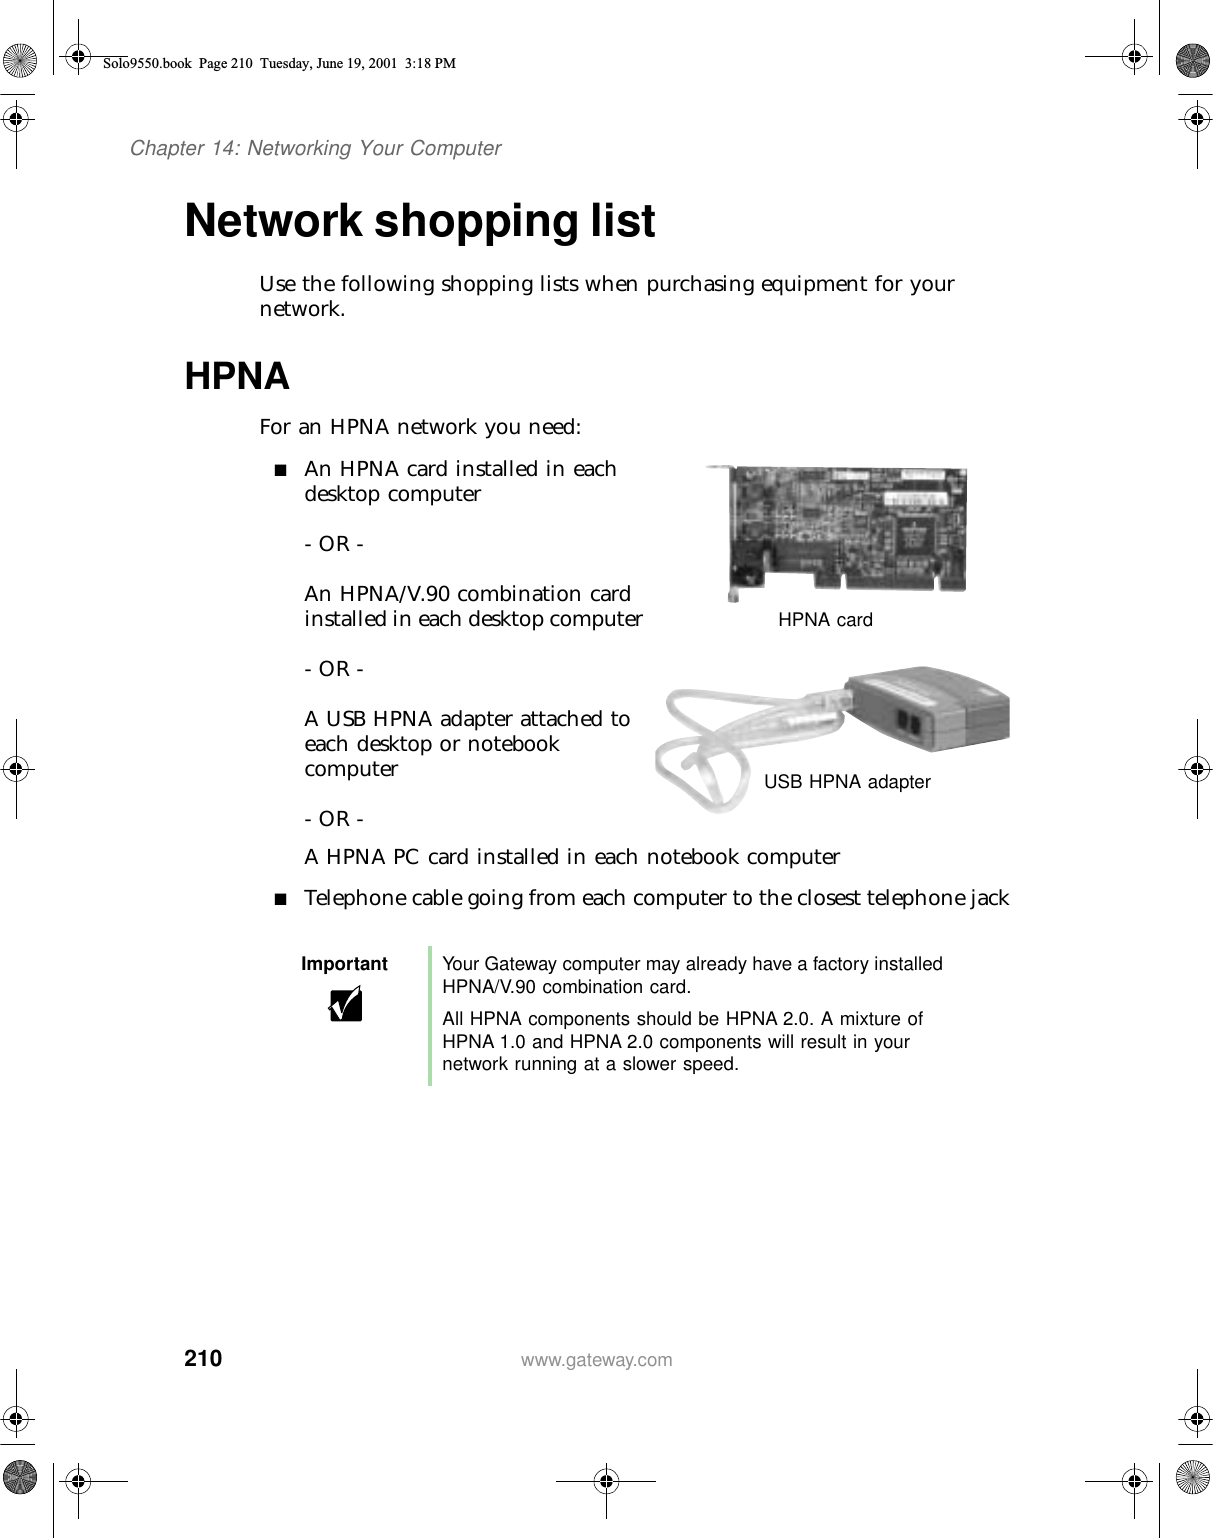 210Chapter 14: Networking Your Computerwww.gateway.comNetwork shopping listUse the following shopping lists when purchasing equipment for your network.HPNAFor an HPNA network you need:■An HPNA card installed in each desktop computer- OR -An HPNA/V.90 combination card installed in each desktop computer- OR -A USB HPNA adapter attached to each desktop or notebook computer- OR -A HPNA PC card installed in each notebook computer■Telephone cable going from each computer to the closest telephone jackImportant Your Gateway computer may already have a factory installed HPNA/V.90 combination card.All HPNA components should be HPNA 2.0. A mixture of HPNA 1.0 and HPNA 2.0 components will result in your network running at a slower speed.HPNA cardUSB HPNA adapterSolo9550.book Page 210 Tuesday, June 19, 2001 3:18 PM